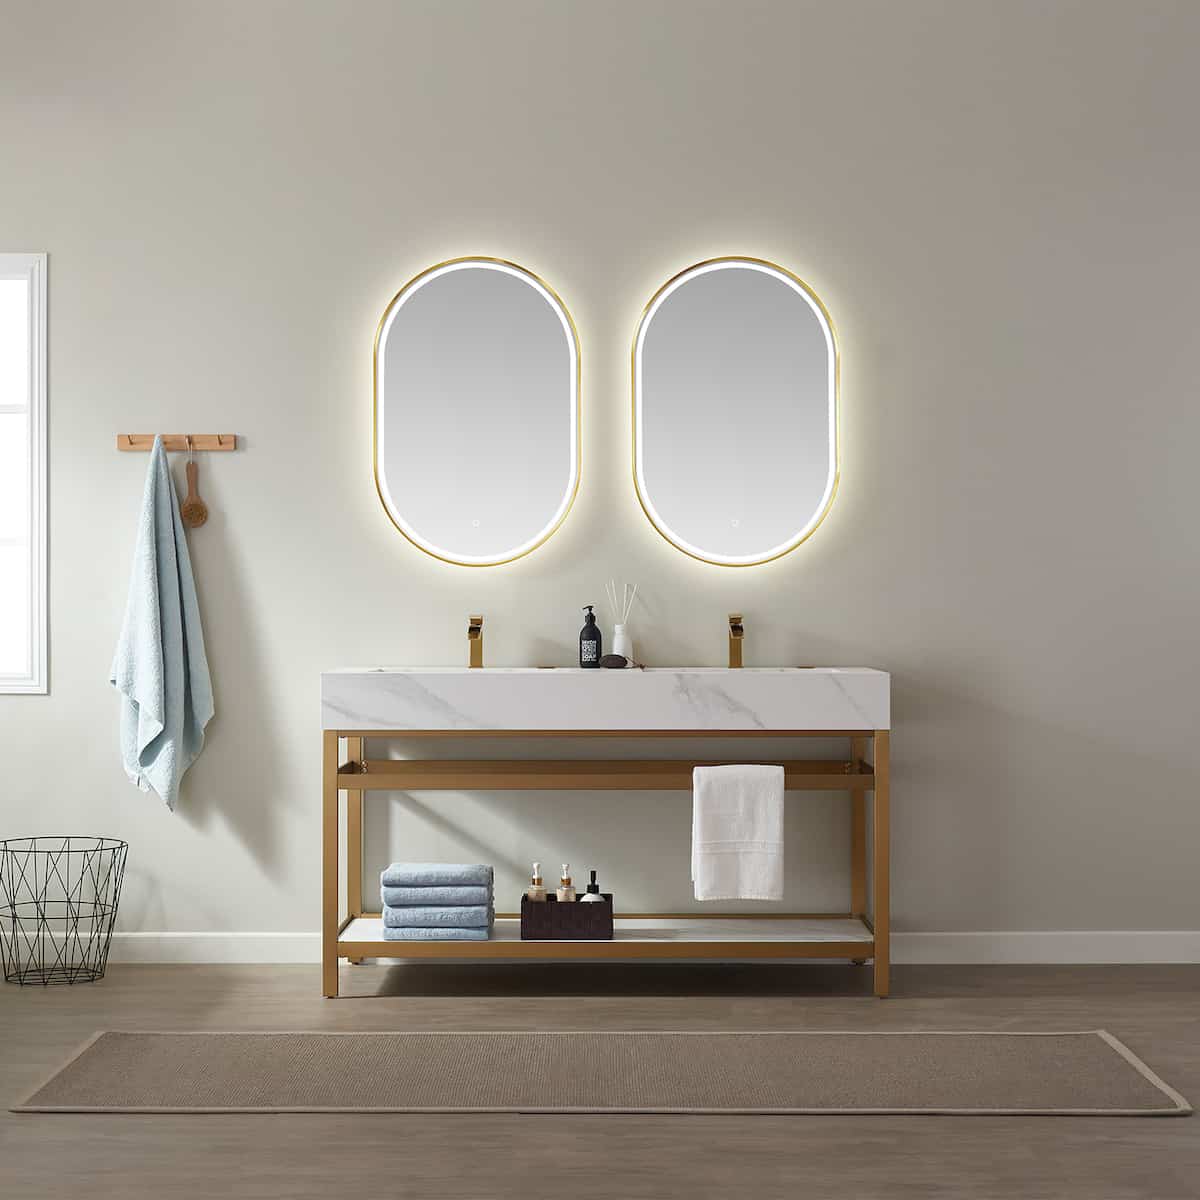 Vinnova Bilbao 60 Inch Freestanding Double Vanity with Brushed-Gold Stainless Steel Bracket Match with Snow Mountain-White Stone Countertop With LED Mirrors in Bathroom 701160-BG-SMB